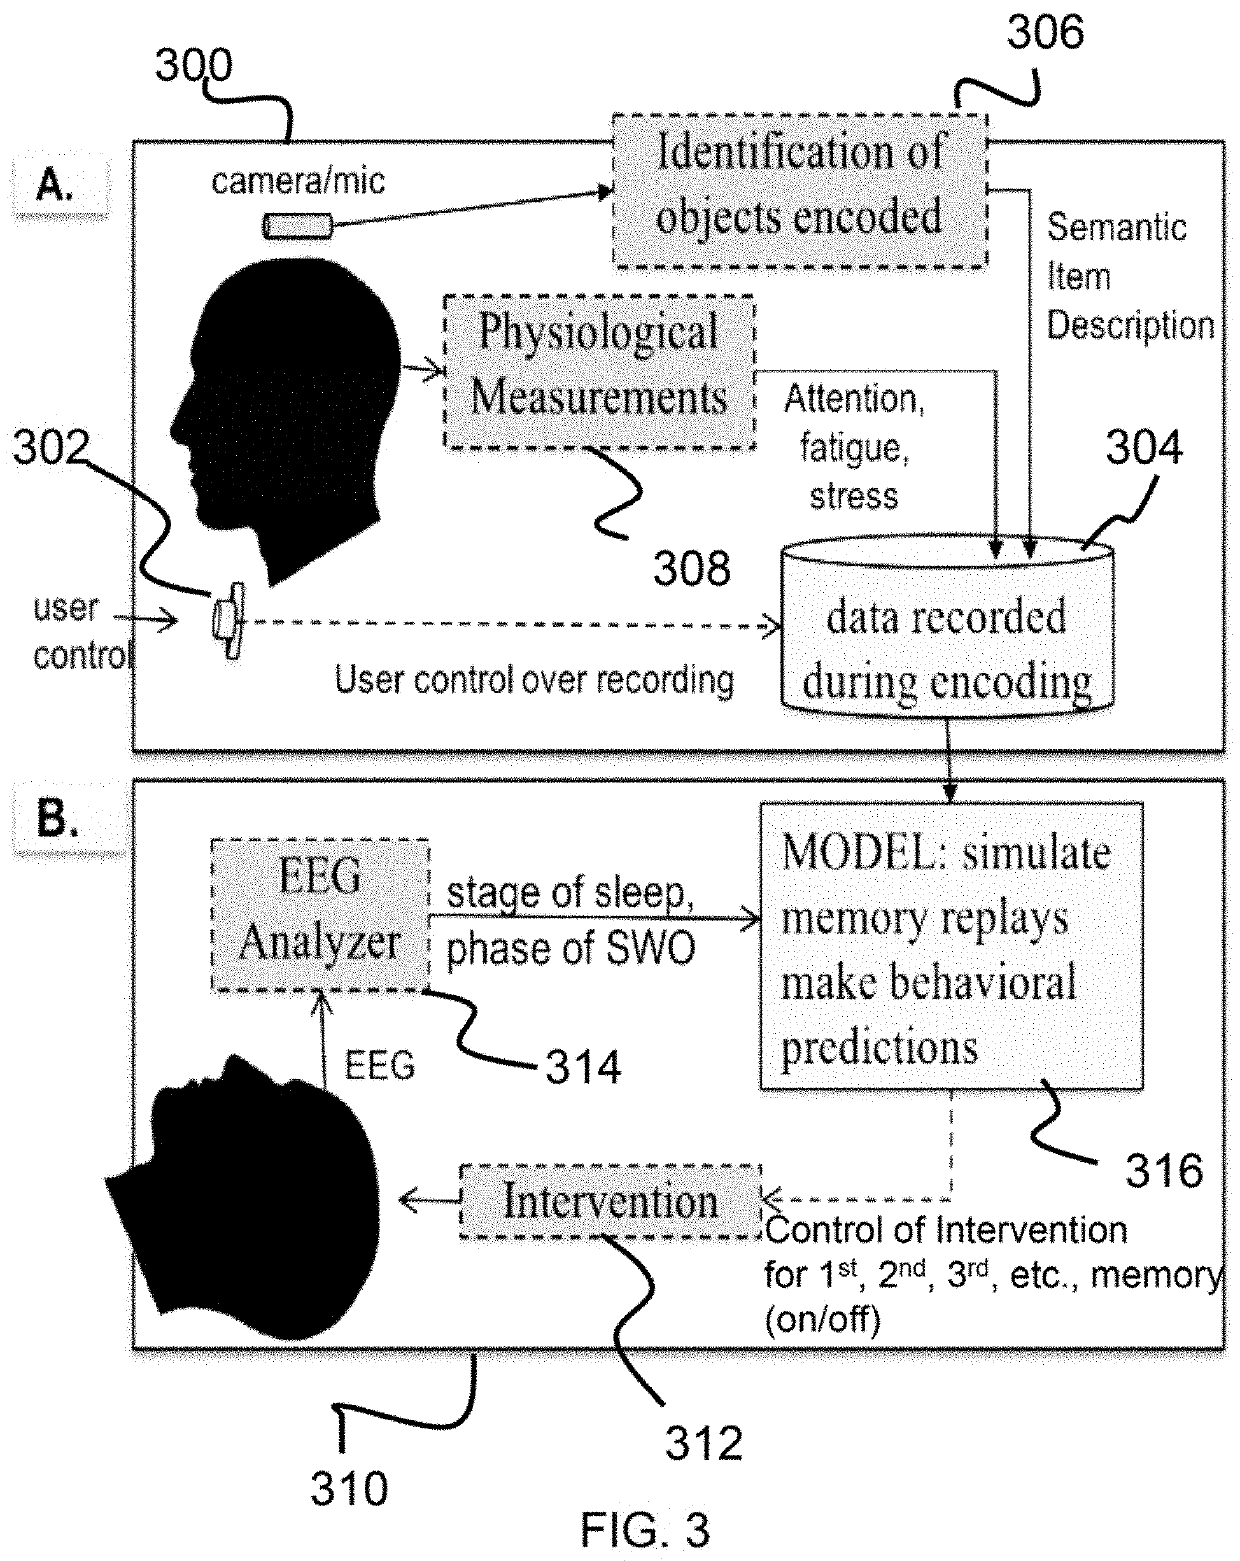 Closed-loop model-based controller for accelerating memory and skill acquisition